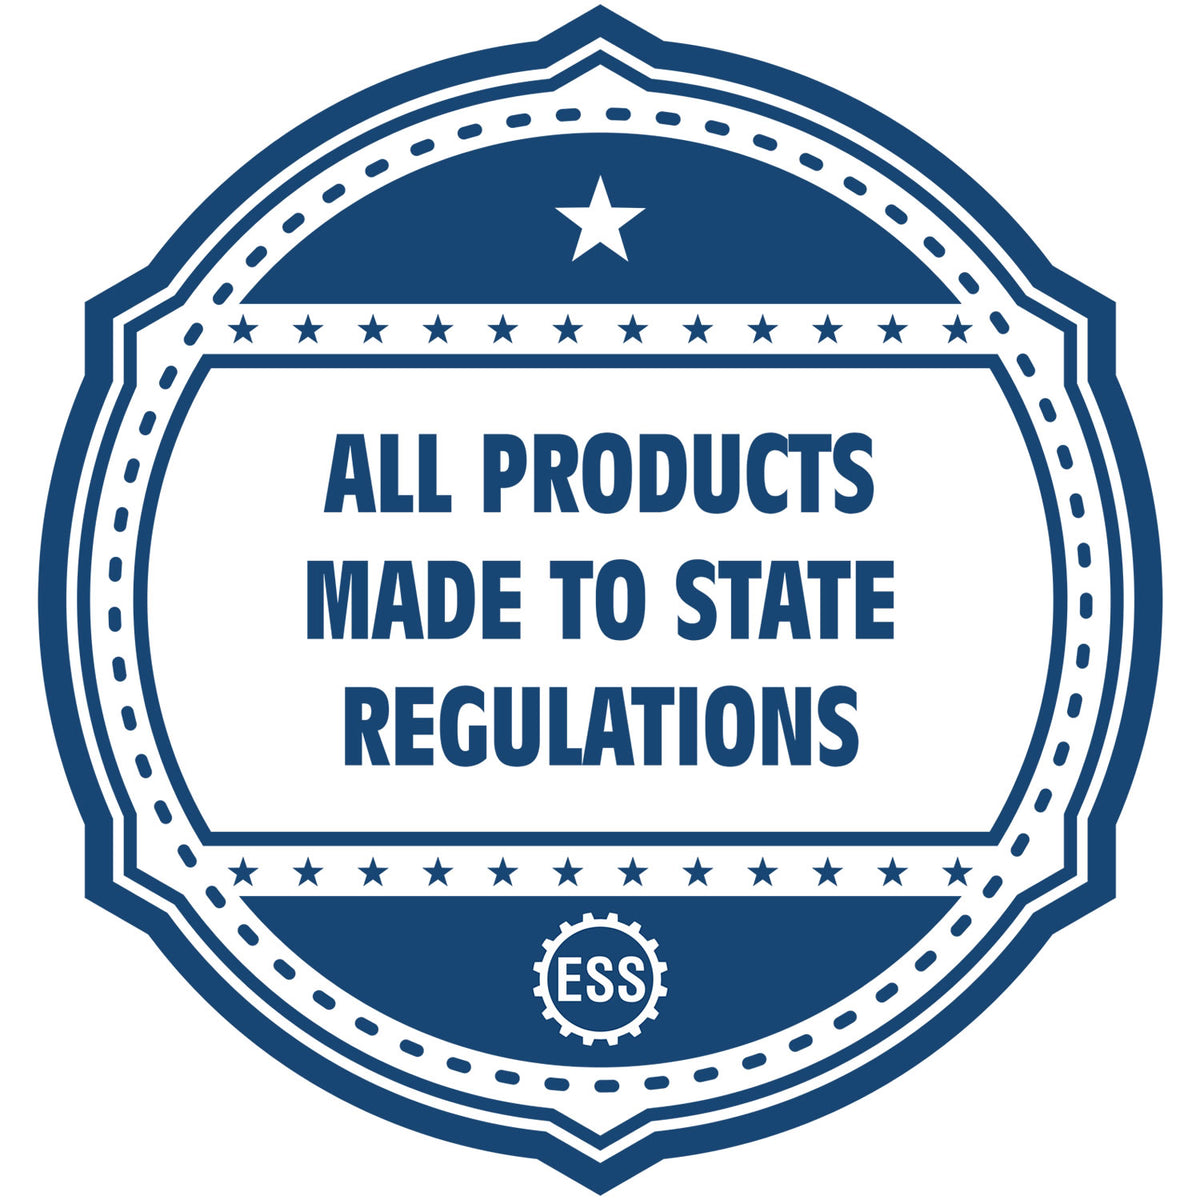 An icon or badge element for the Extended Long Reach Rhode Island Architect Seal Embosser showing that this product is made in compliance with state regulations.